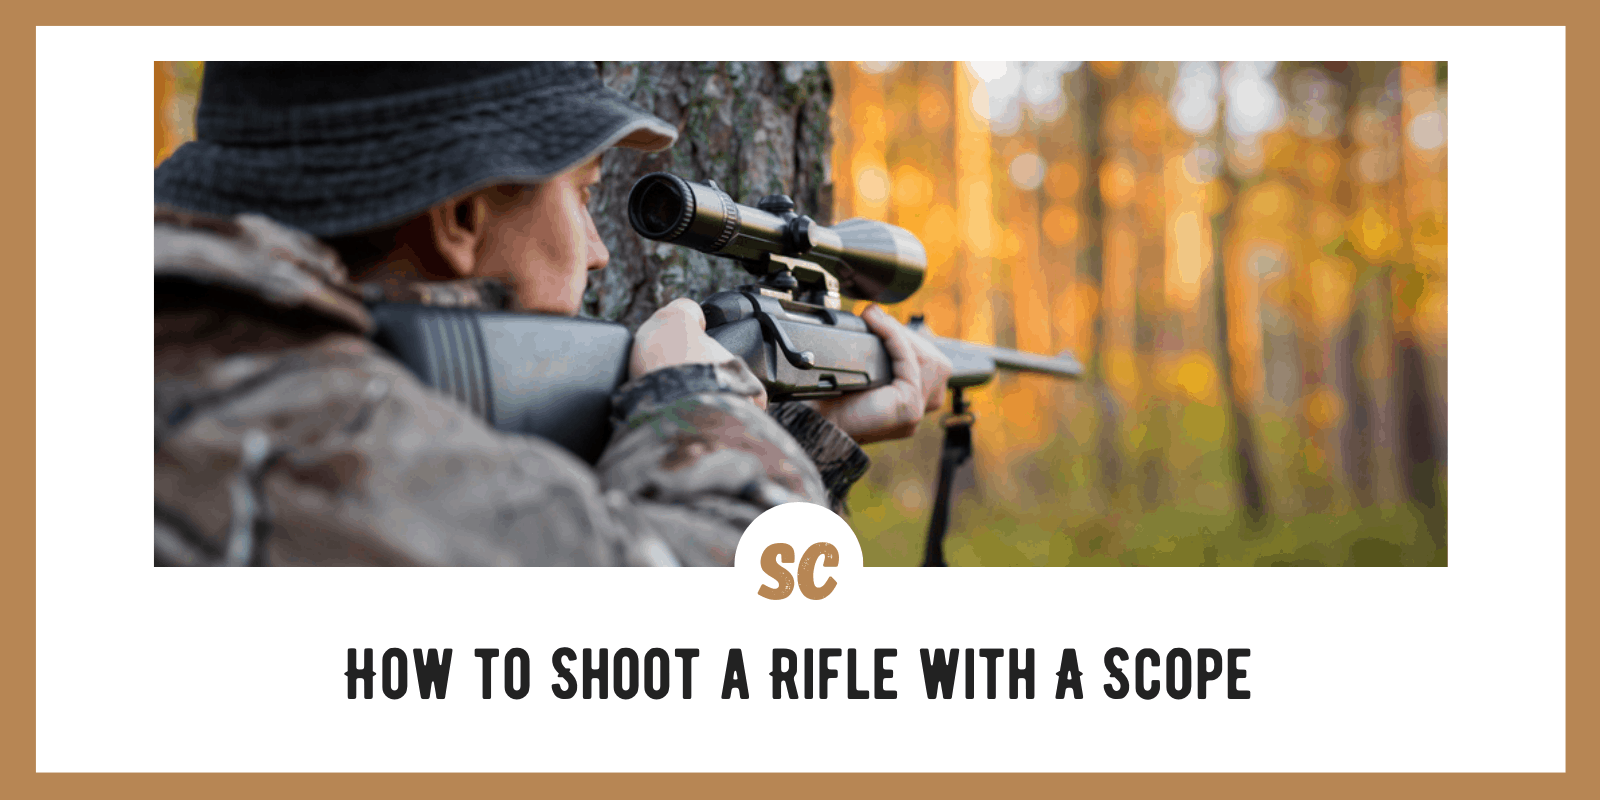 How to Shoot a Rifle with A Scope: Eye Relief, Positioning, Routines